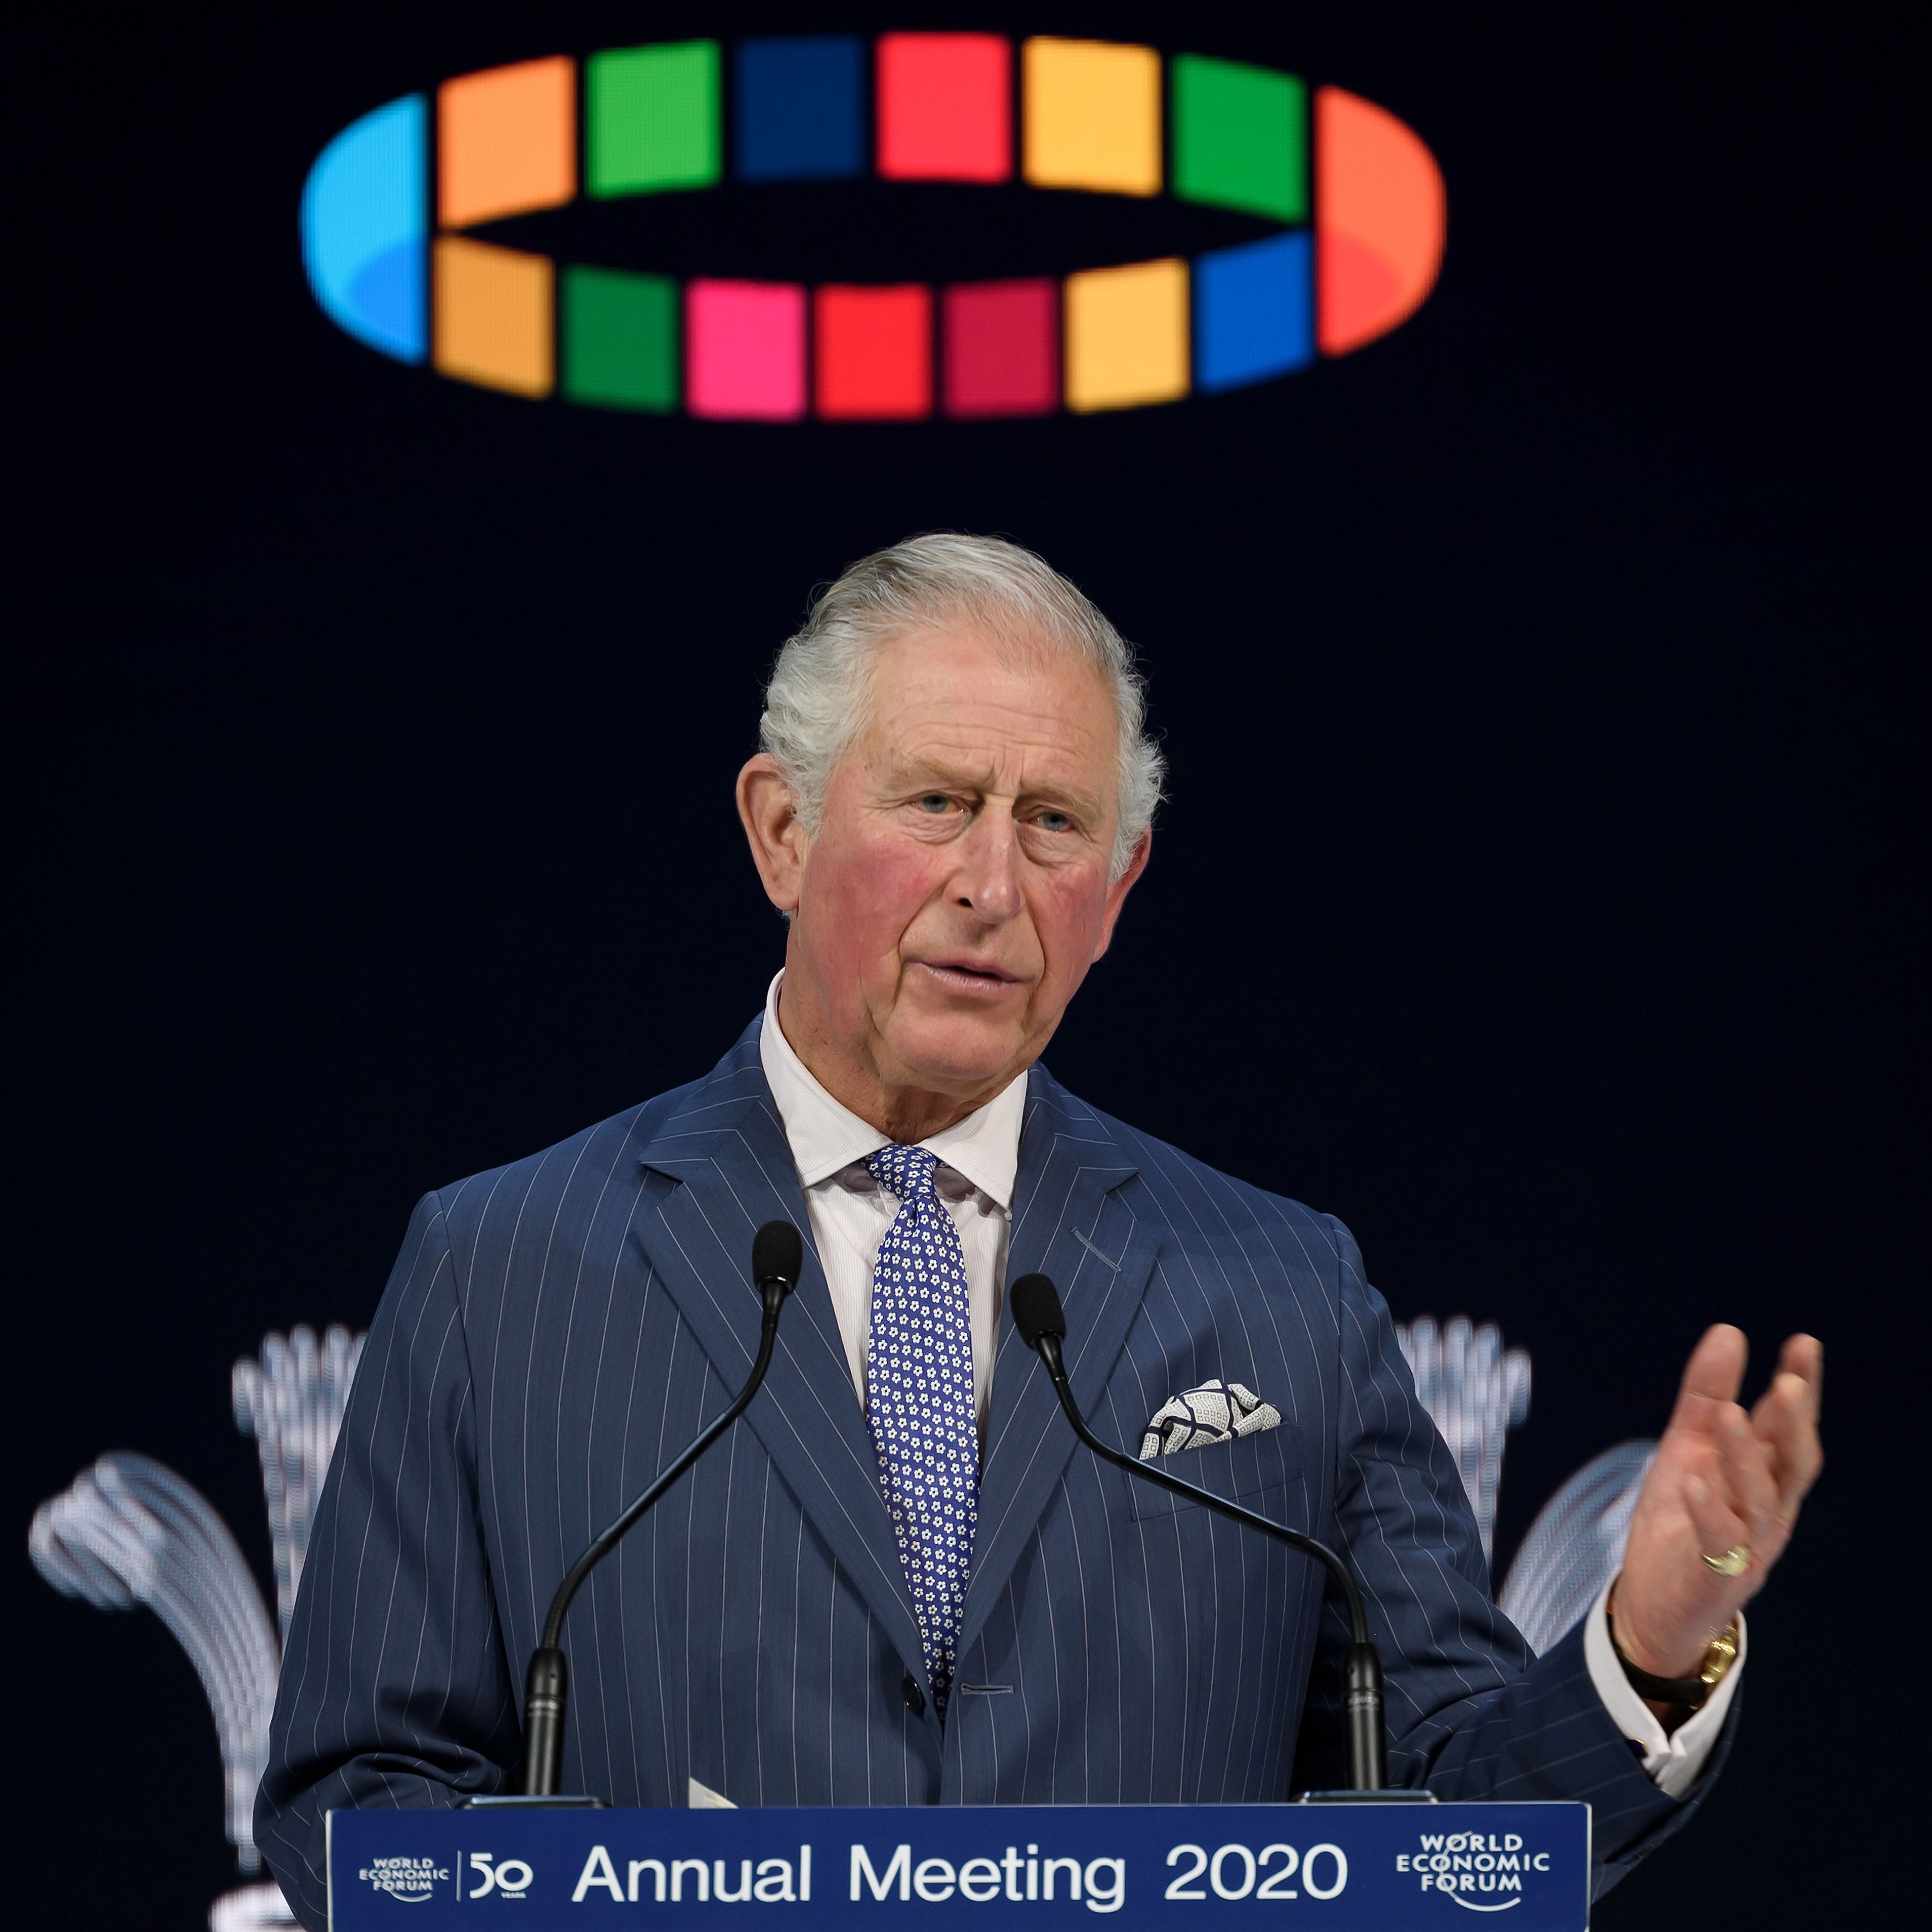 Britain's Prince Charles, Prince of Wales, delivers a speech at the World Economic Forum during the World Economic Forum (WEF) annual meeting in Davos. (AFP Photo)